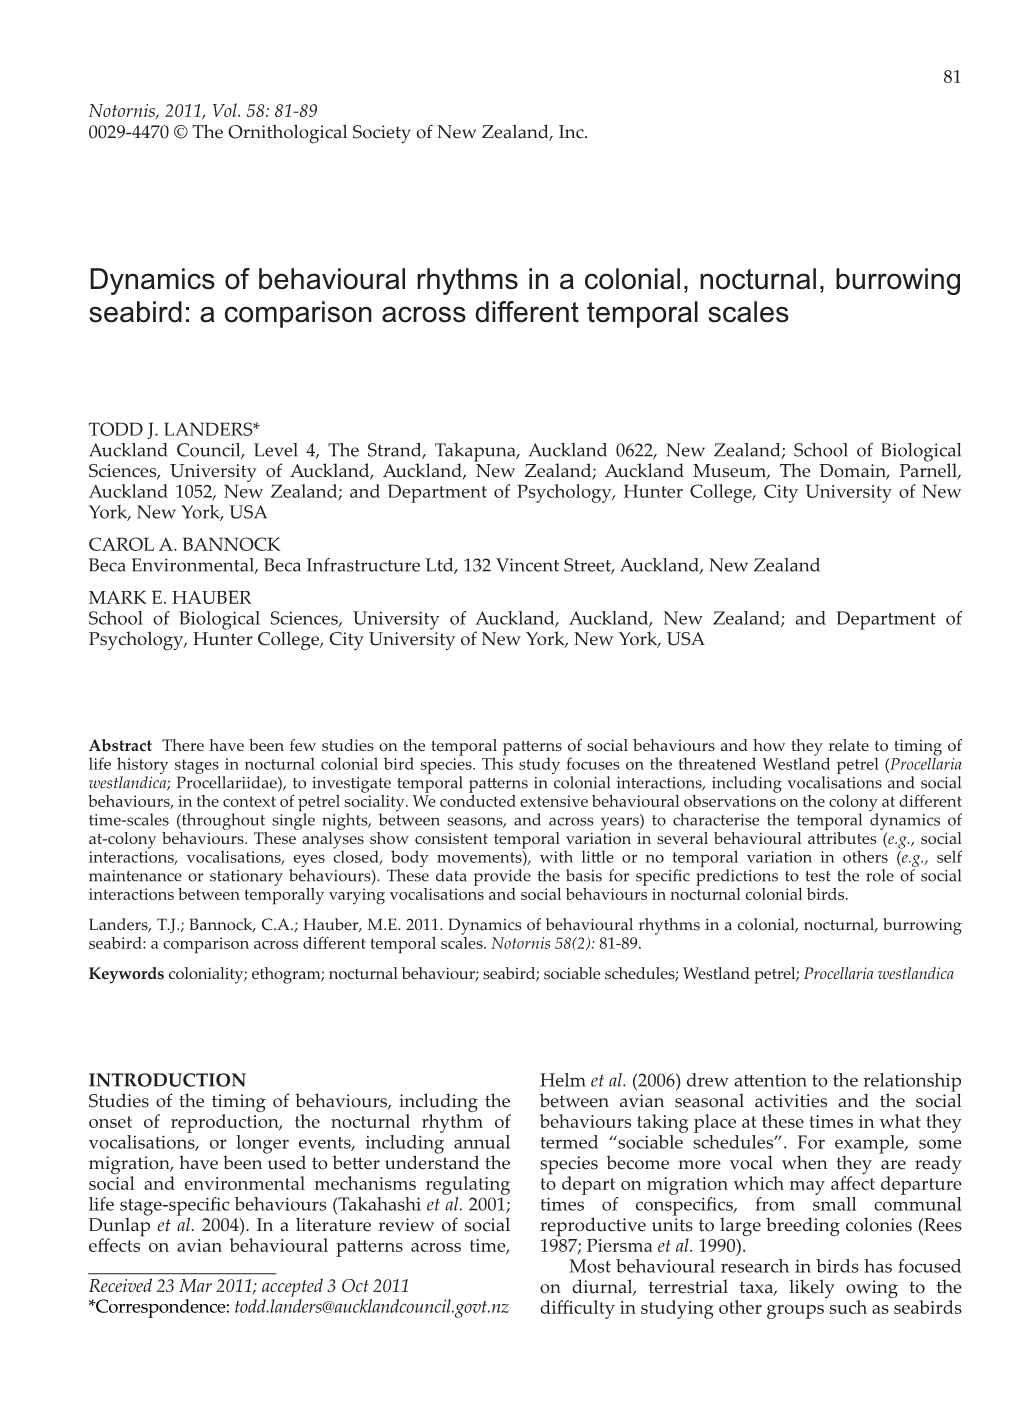 Dynamics of Behavioural Rhythms in a Colonial, Nocturnal, Burrowing Seabird: a Comparison Across Different Temporal Scales